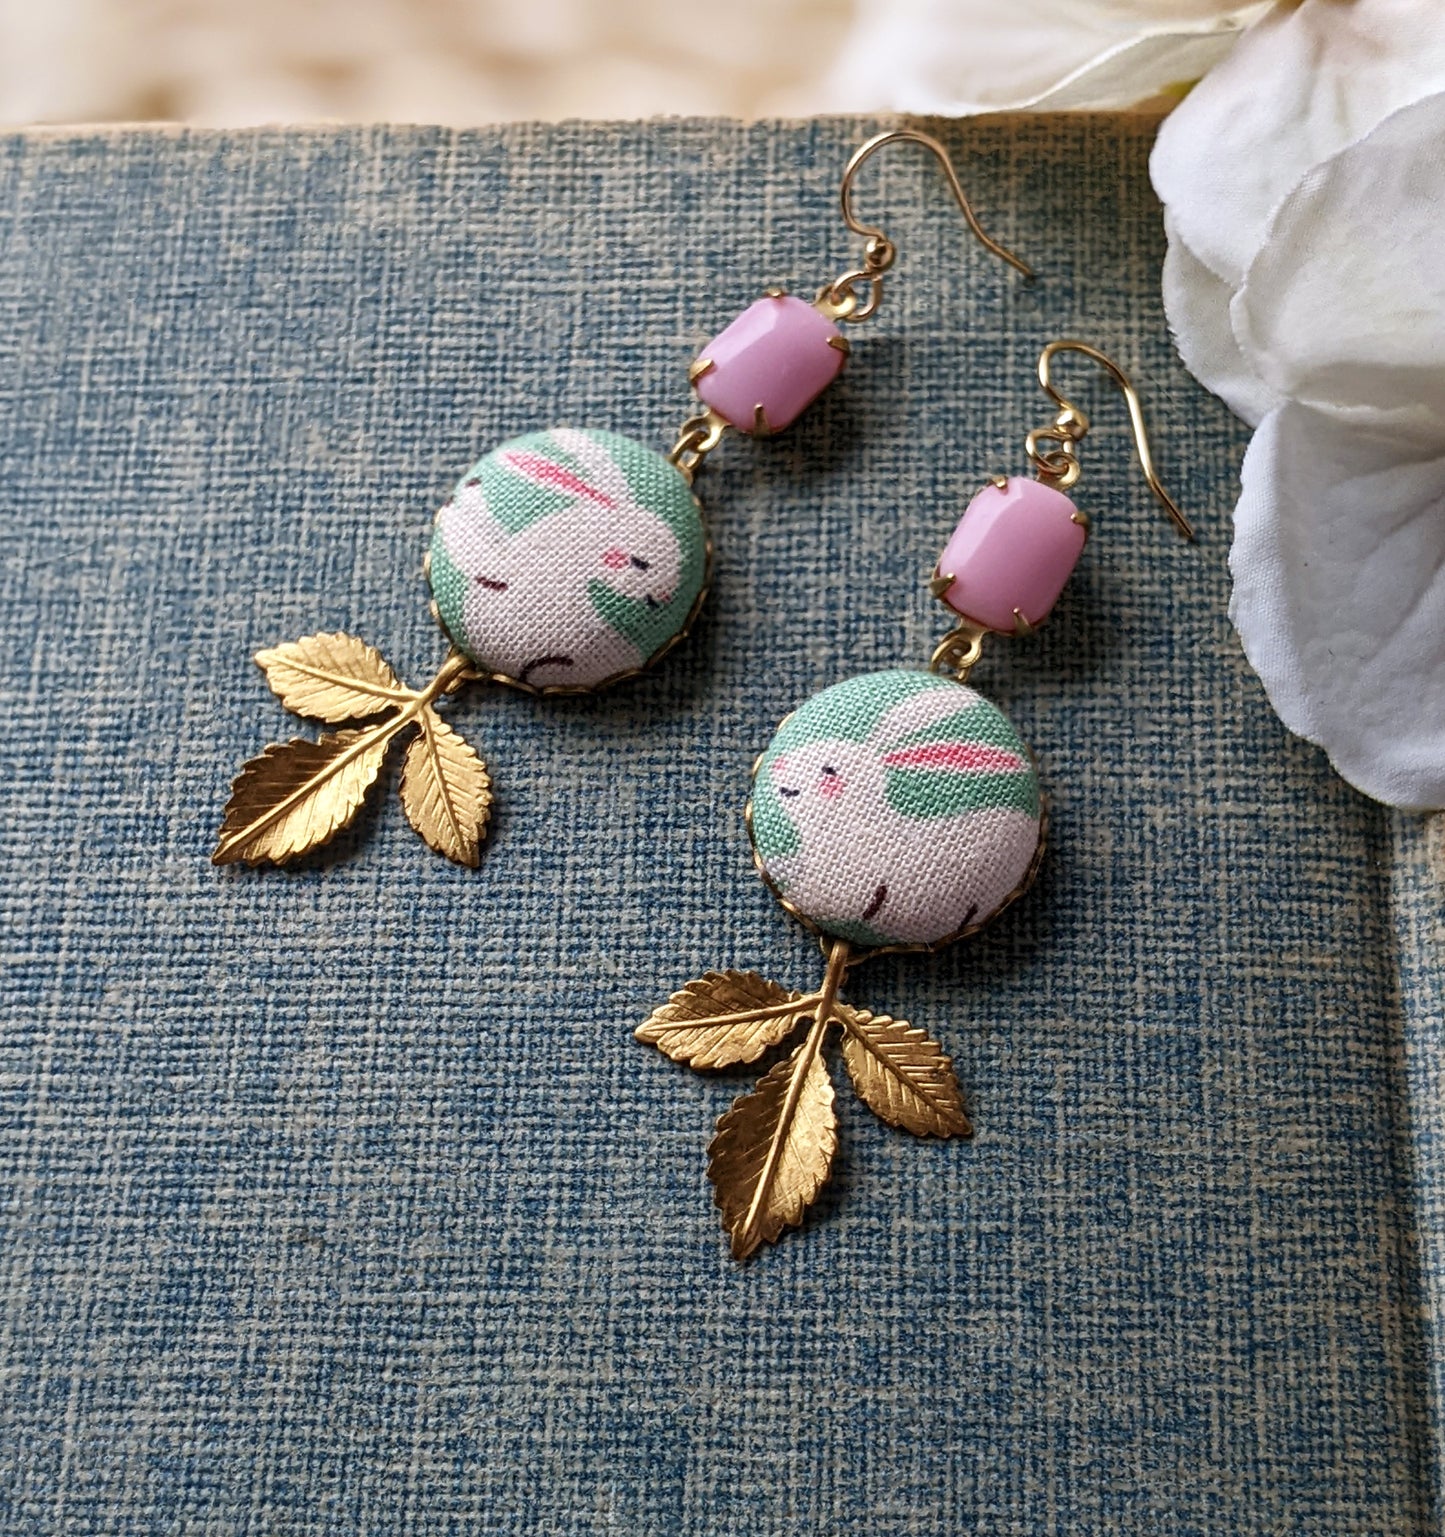 Pastel Bunny Earrings, Fabric, Pink Vintage Glass And Vintage Gold Leaves, Cute Rabbit Jewelry